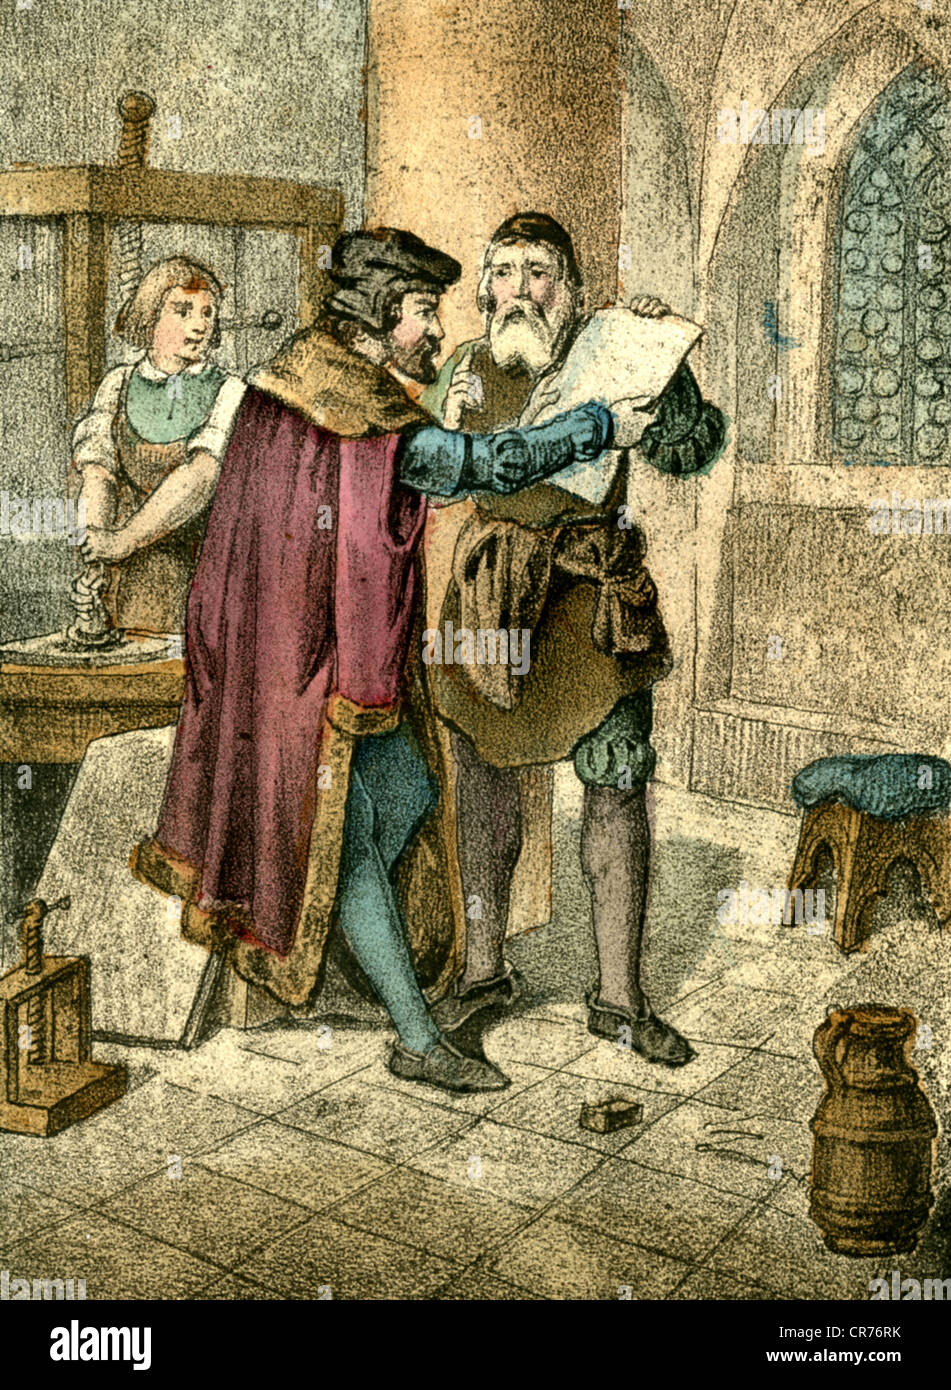 Gutenberg, Johannes, inventor of the art of printing, probably about 1440, born circa 1440, died 1468, coloured copperplate engraving from 'Historische Bilder' (historical pictures), accounts about well known events or men,  arranged  by Dr. F. Orelli, publishing house August Riese, Berlin, circa 1850, Artist's Copyright has not to be cleared Stock Photo